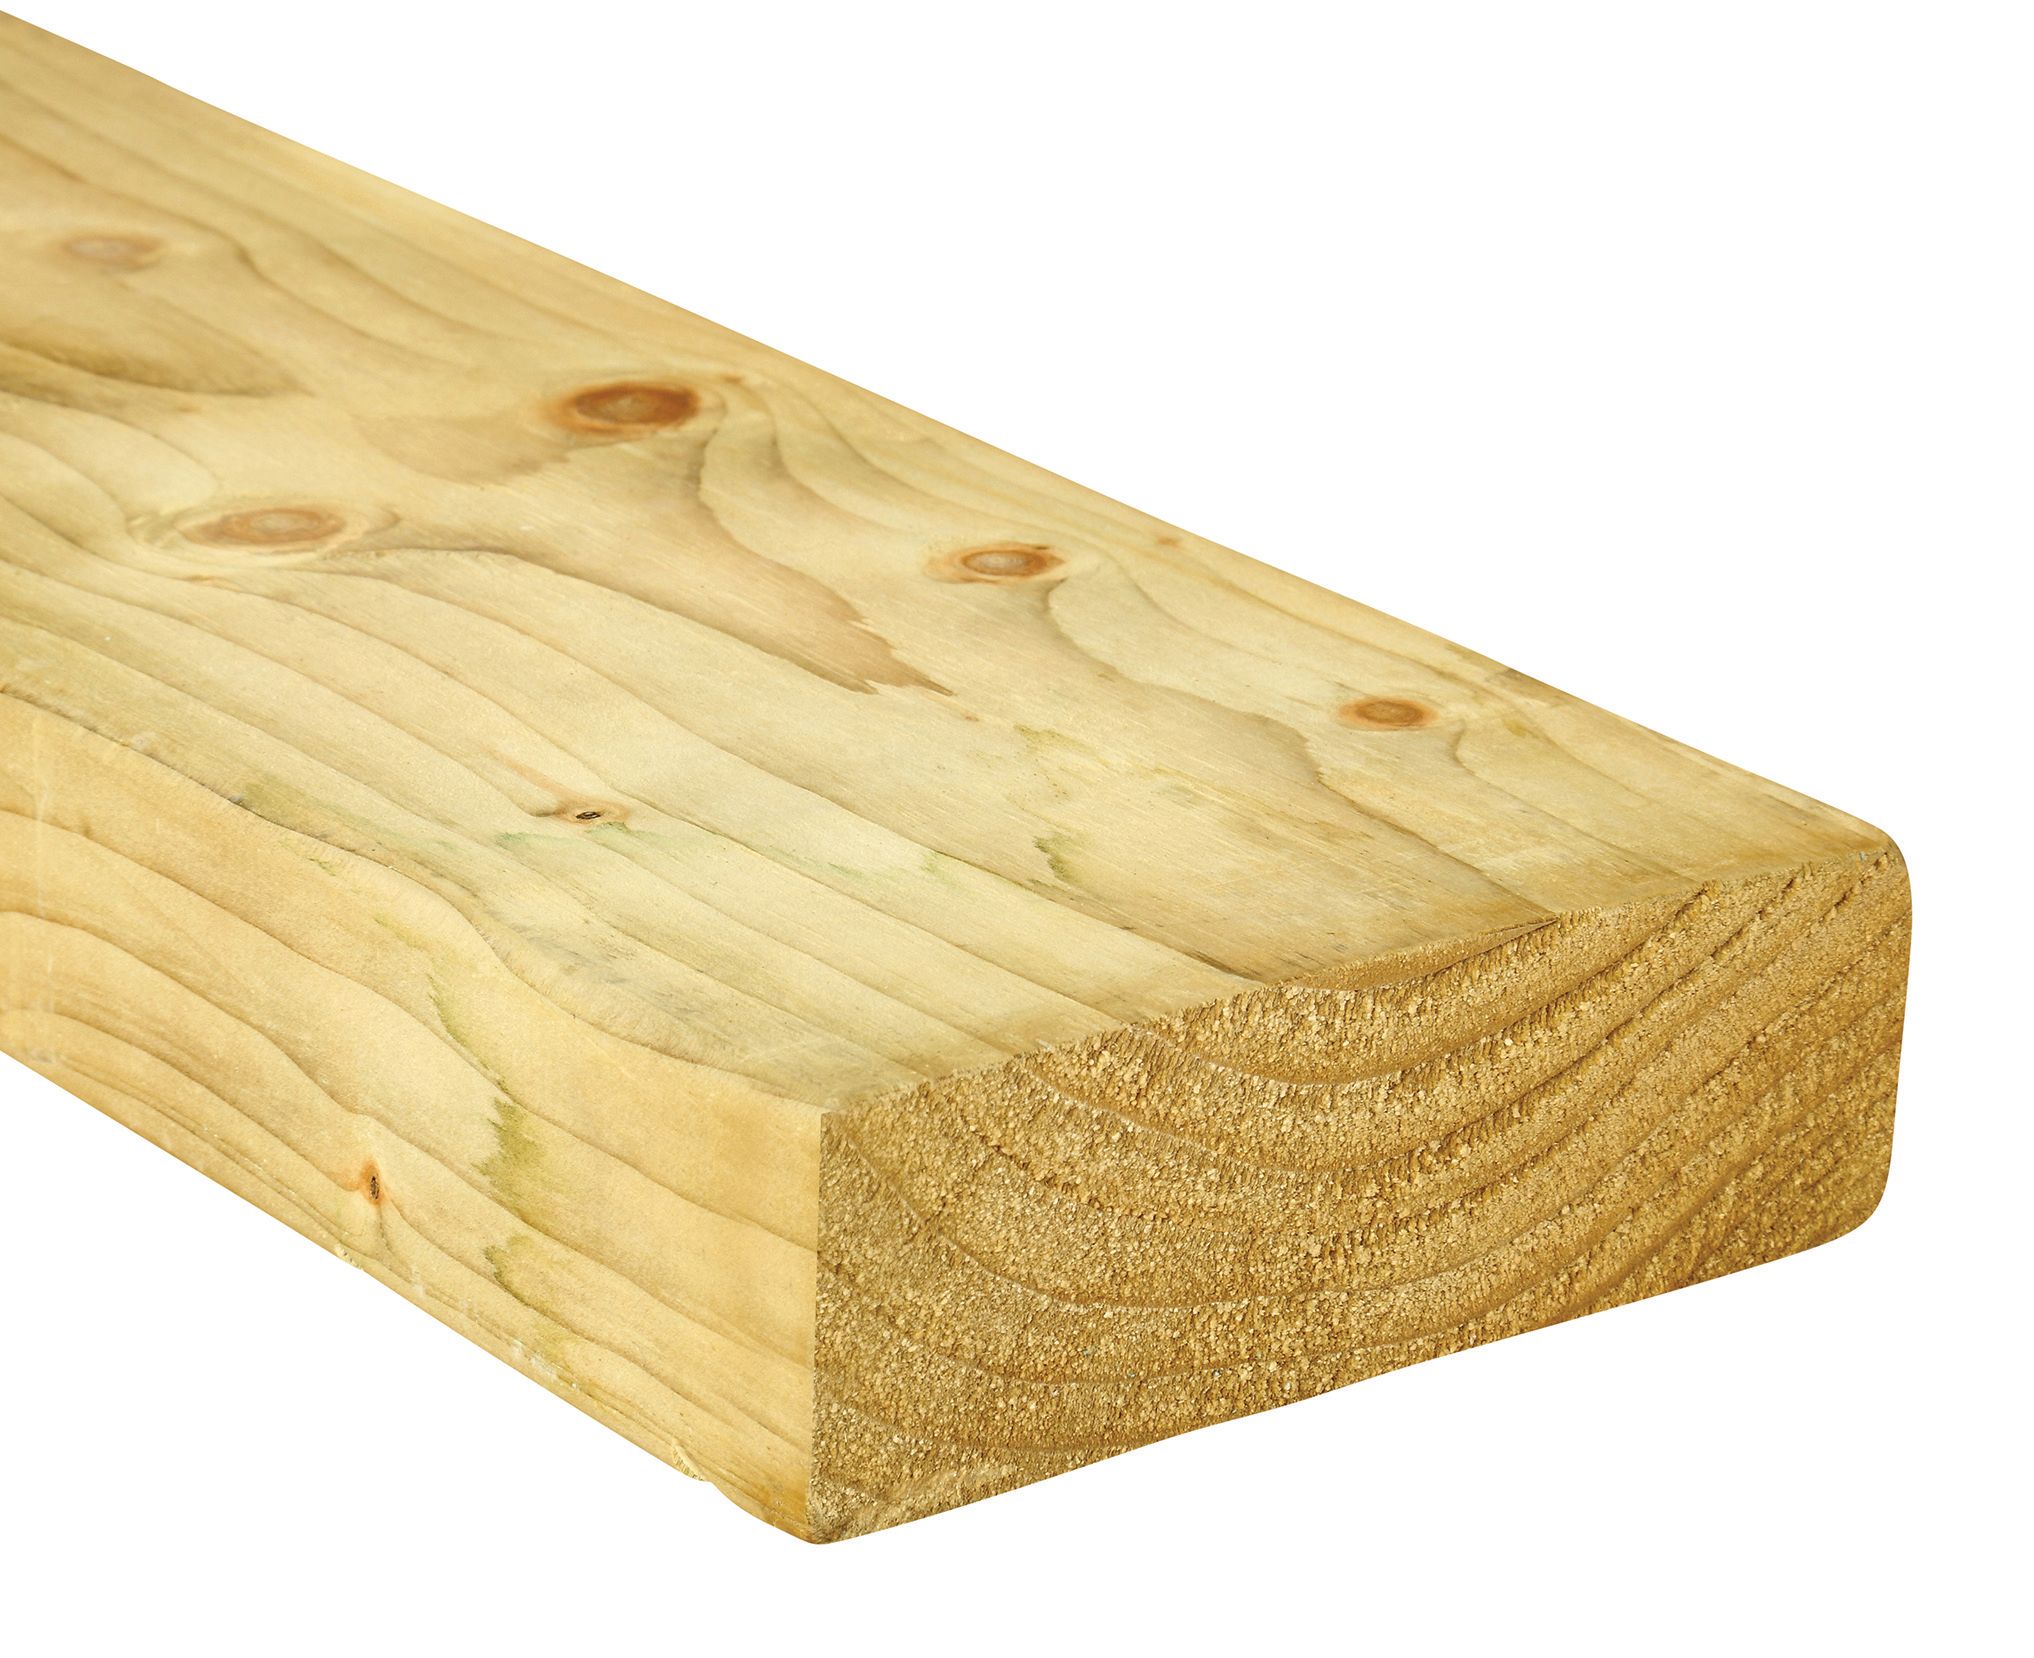 Image of Wickes Treated Kiln Dried C24 Regularised Timber - 45 x 145 x 3600mm